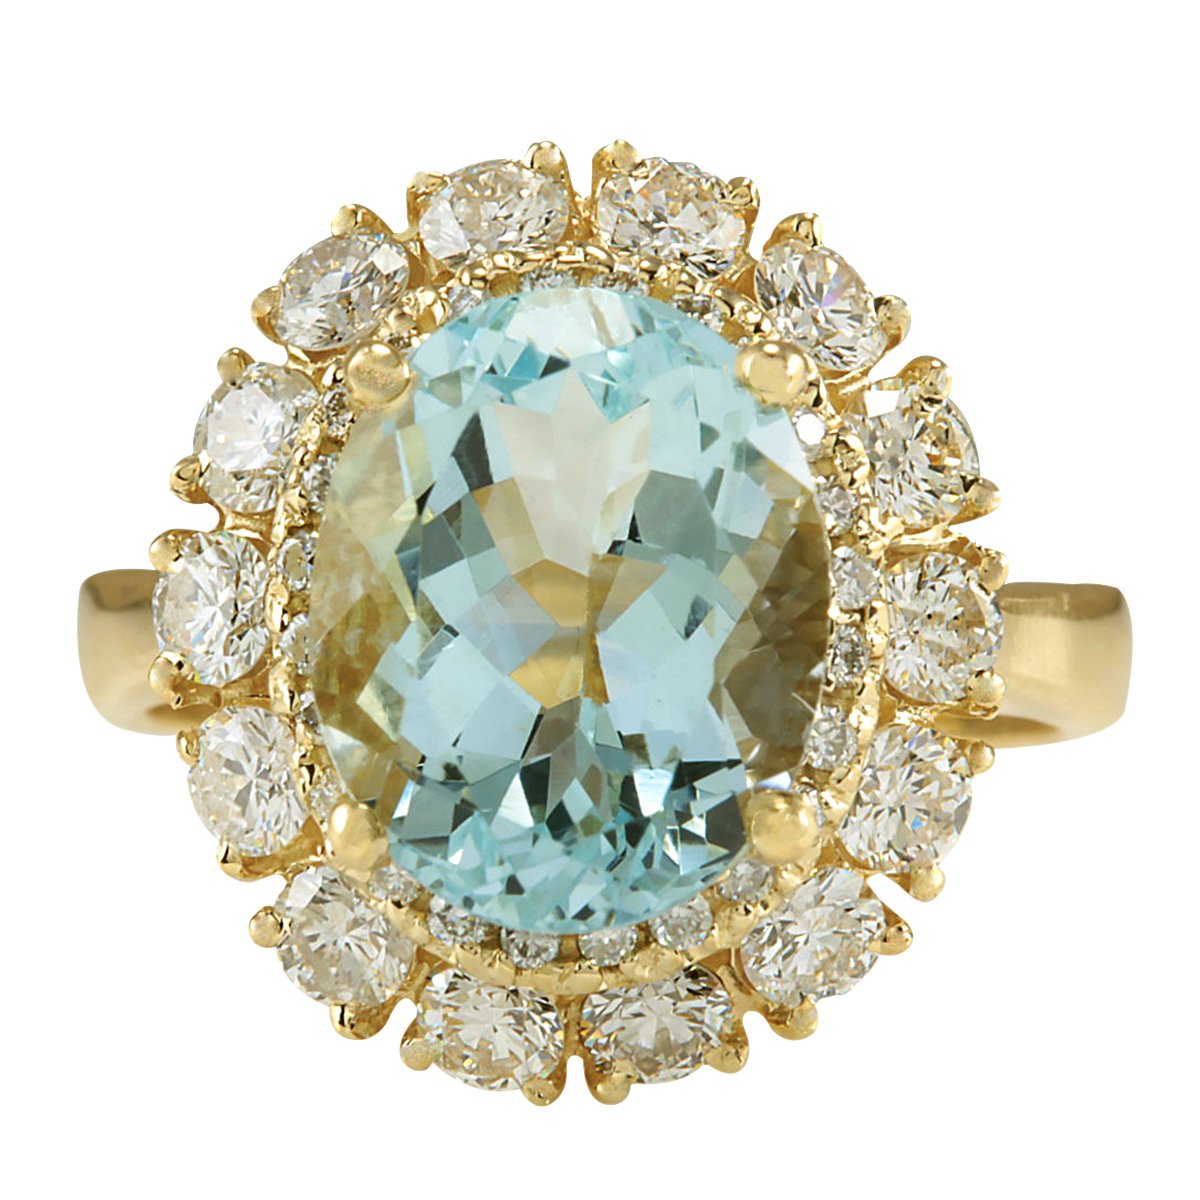 5.15 Carat Natural Blue Aquamarine and Diamond (F-G Color, VS1-VS2 Clarity) 14K Yellow Gold Cocktail Ring for Women Exclusively Handcrafted in USA